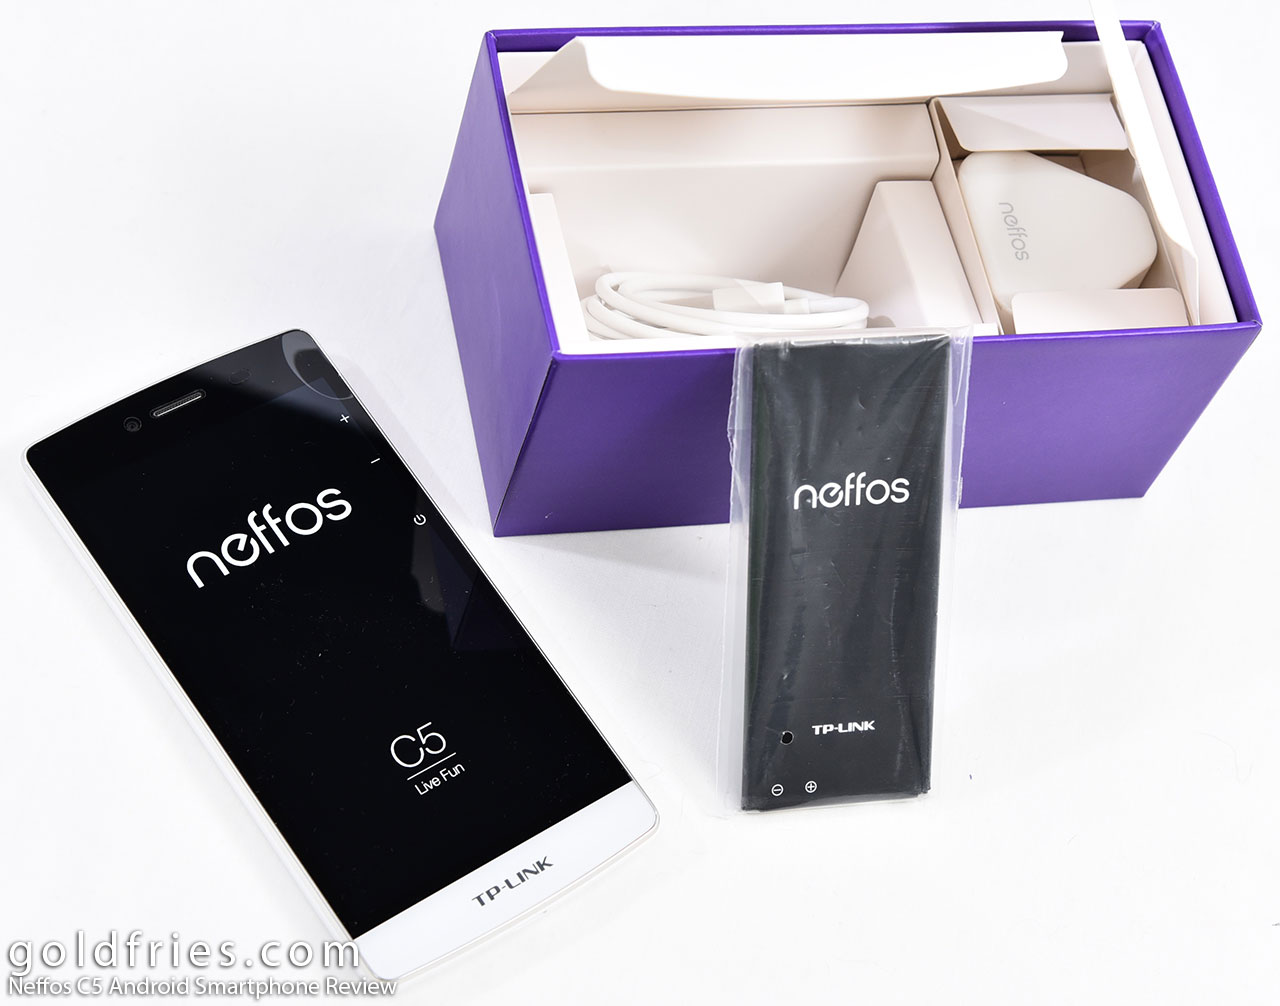 Neffos C5 Android Smartphone Review